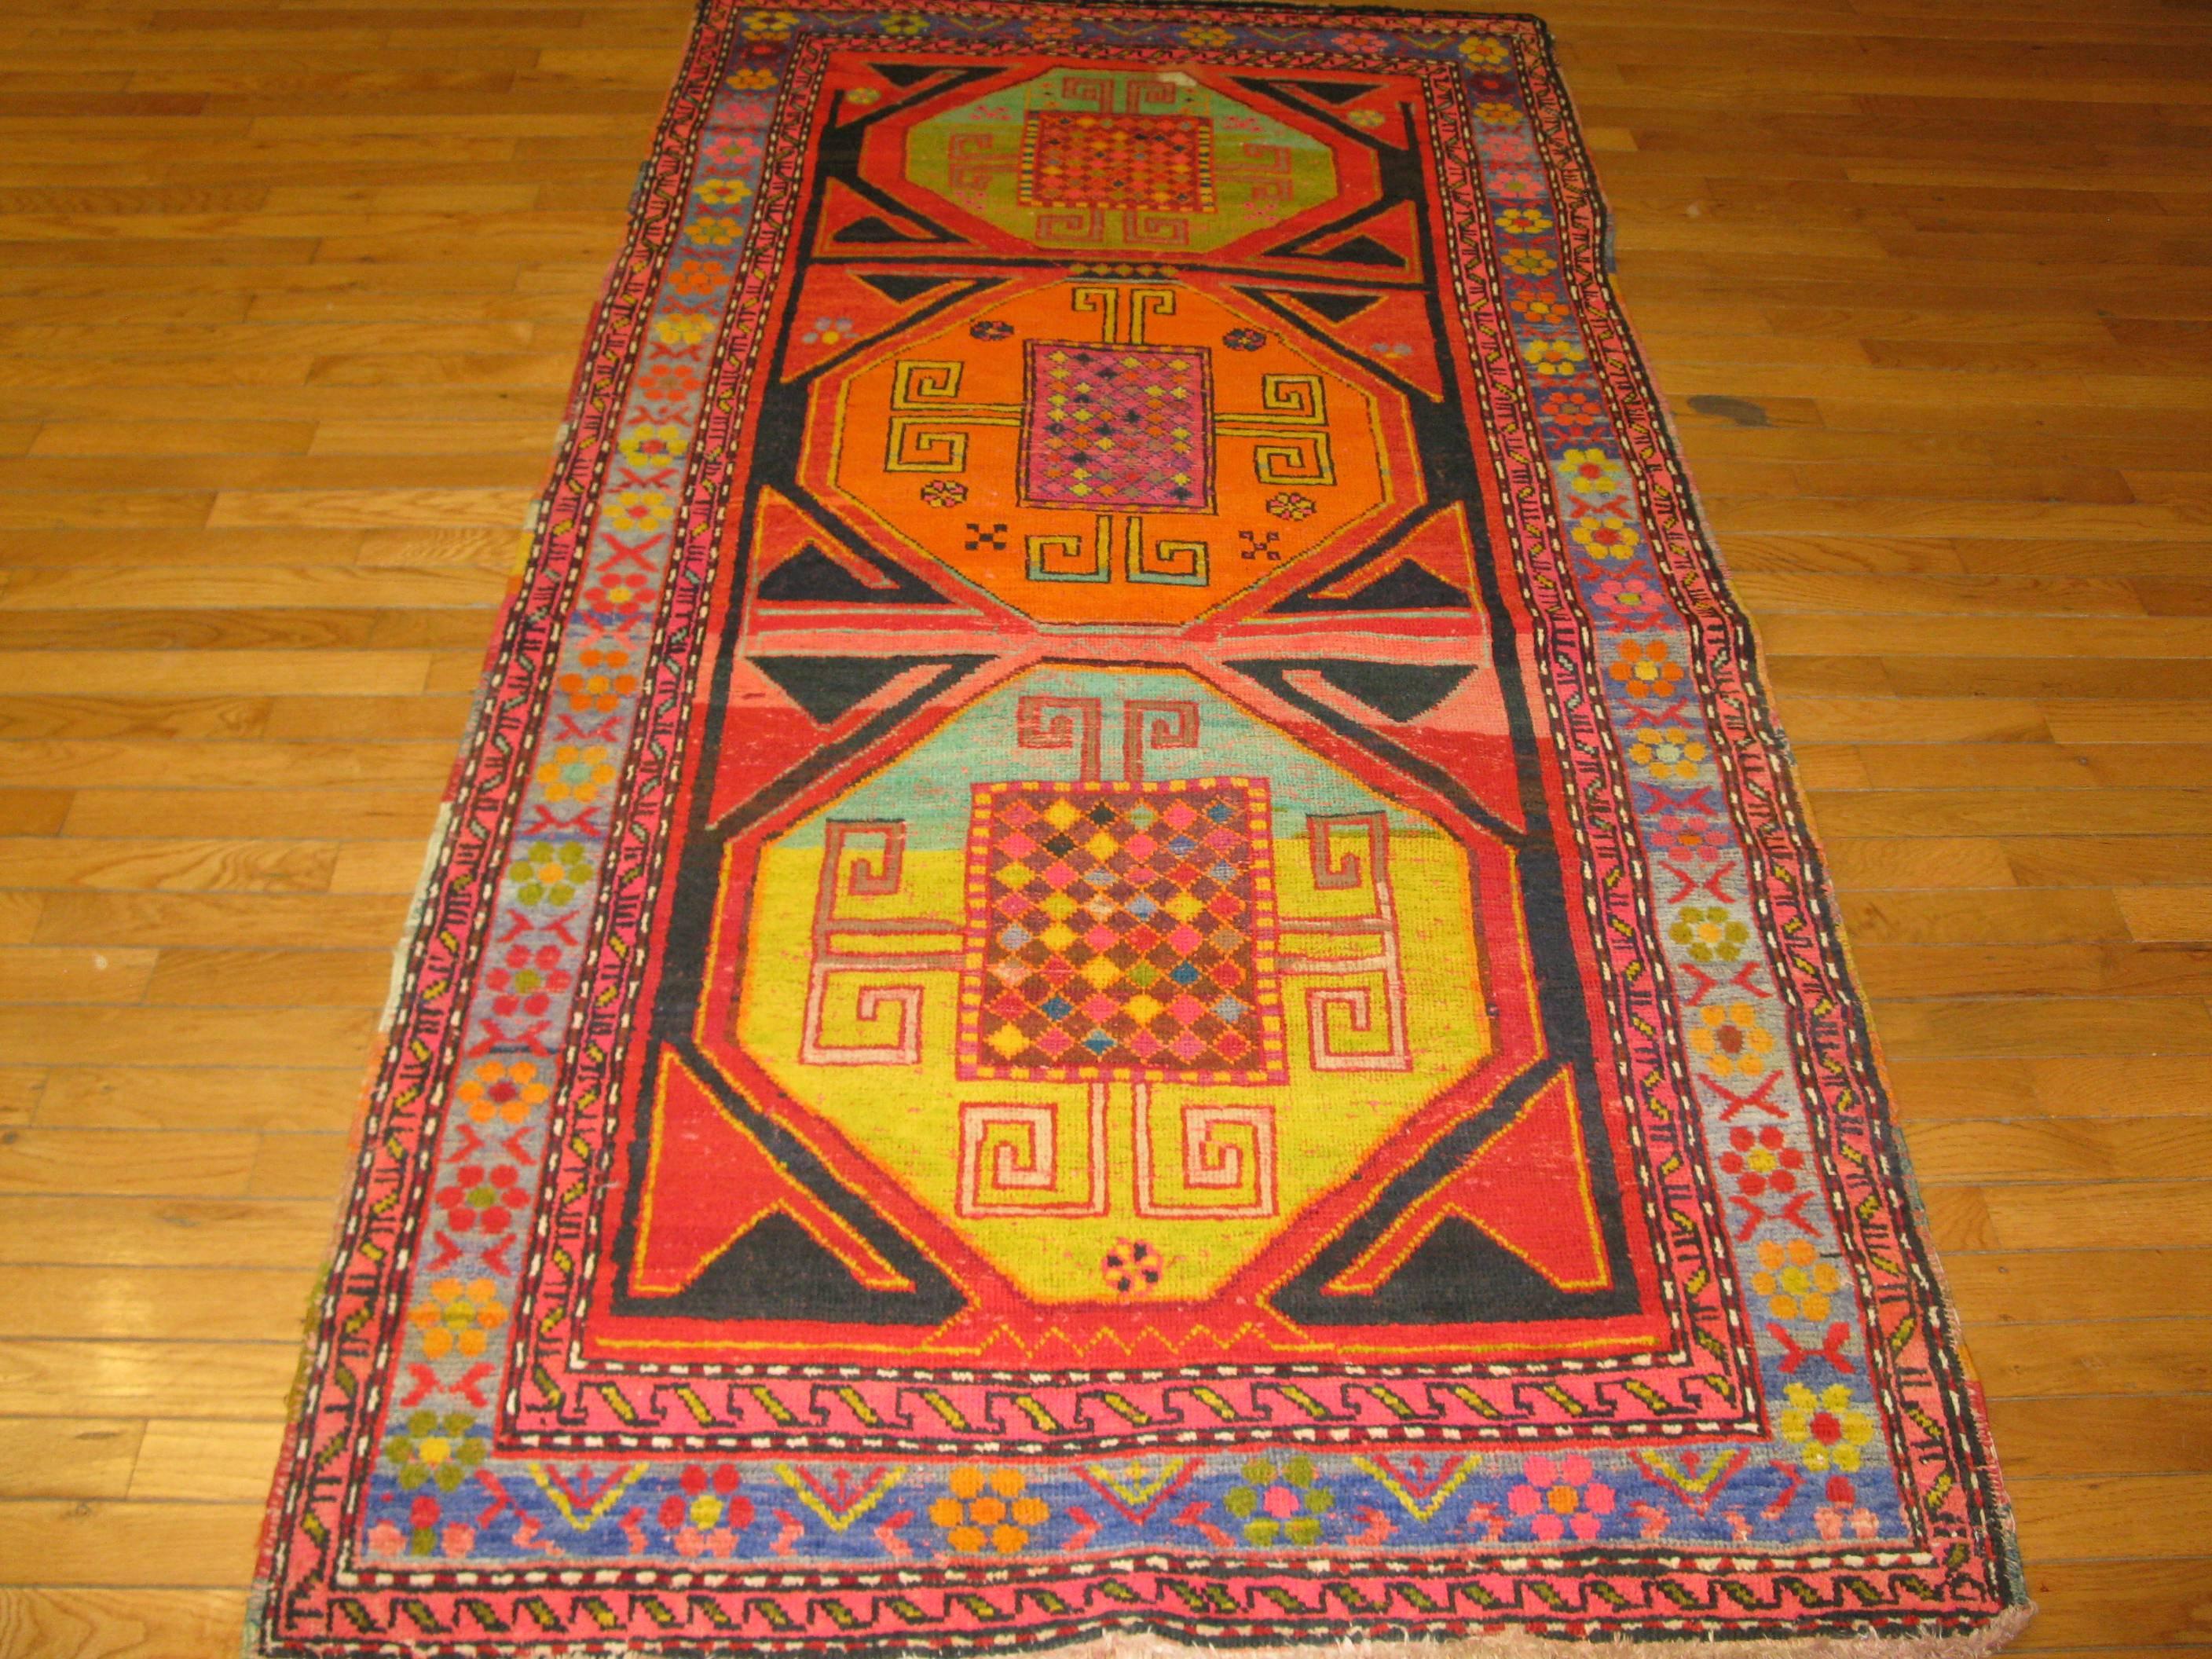 This s a beautiful hand-knotted rug with a tribal Karabag design from the Eastern Anatolian region of Turkey. The rug has rich vibrant color combination, wool pile and cotton foundation. It measures 3' 7'' x 7' 2''.